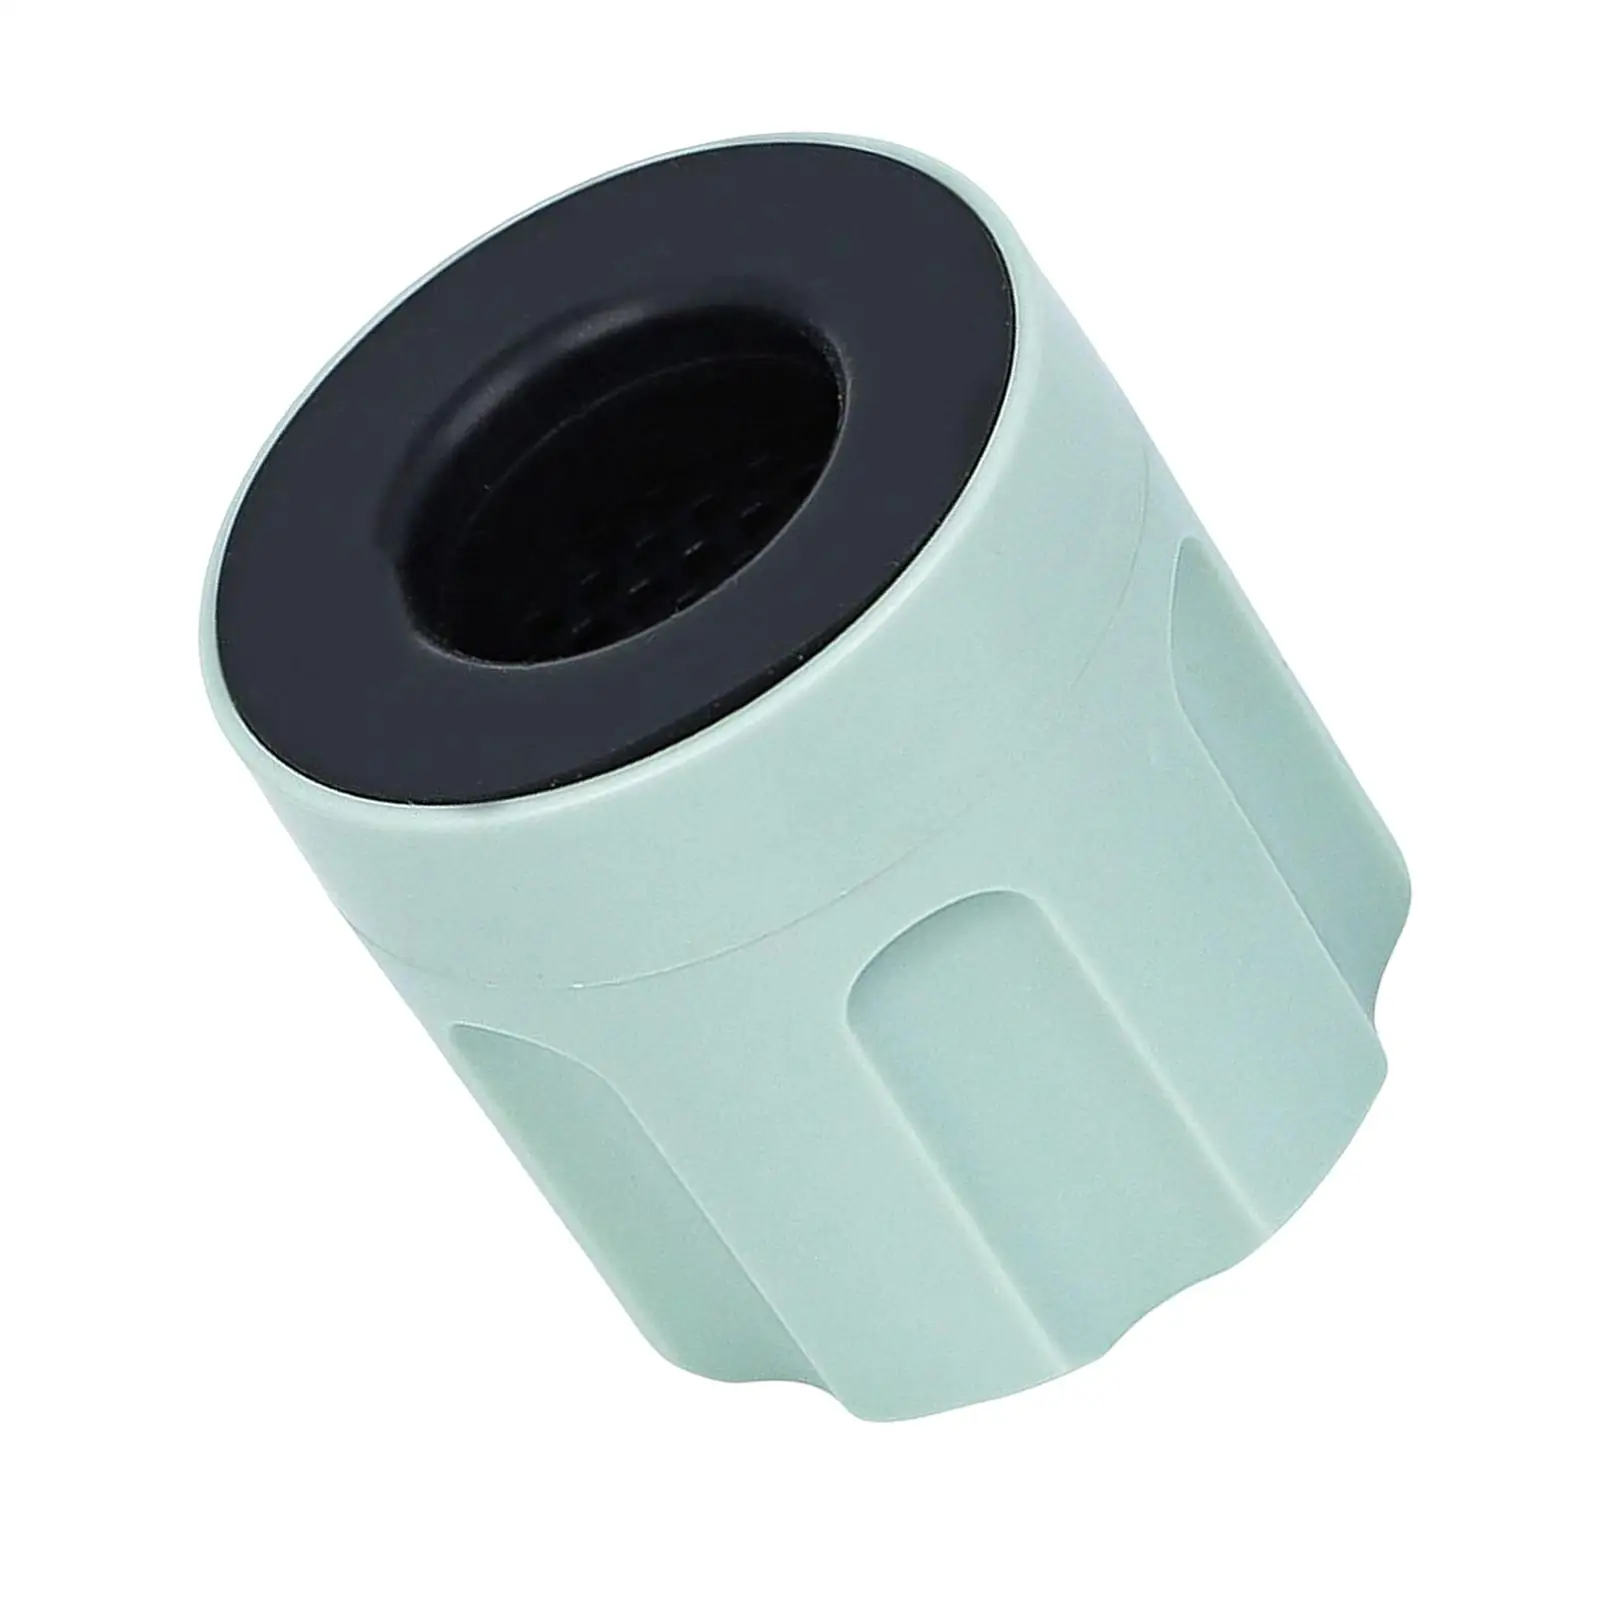 Filter Detachable Personal Air Filter Cleaner Air Filter Filter for Accessory